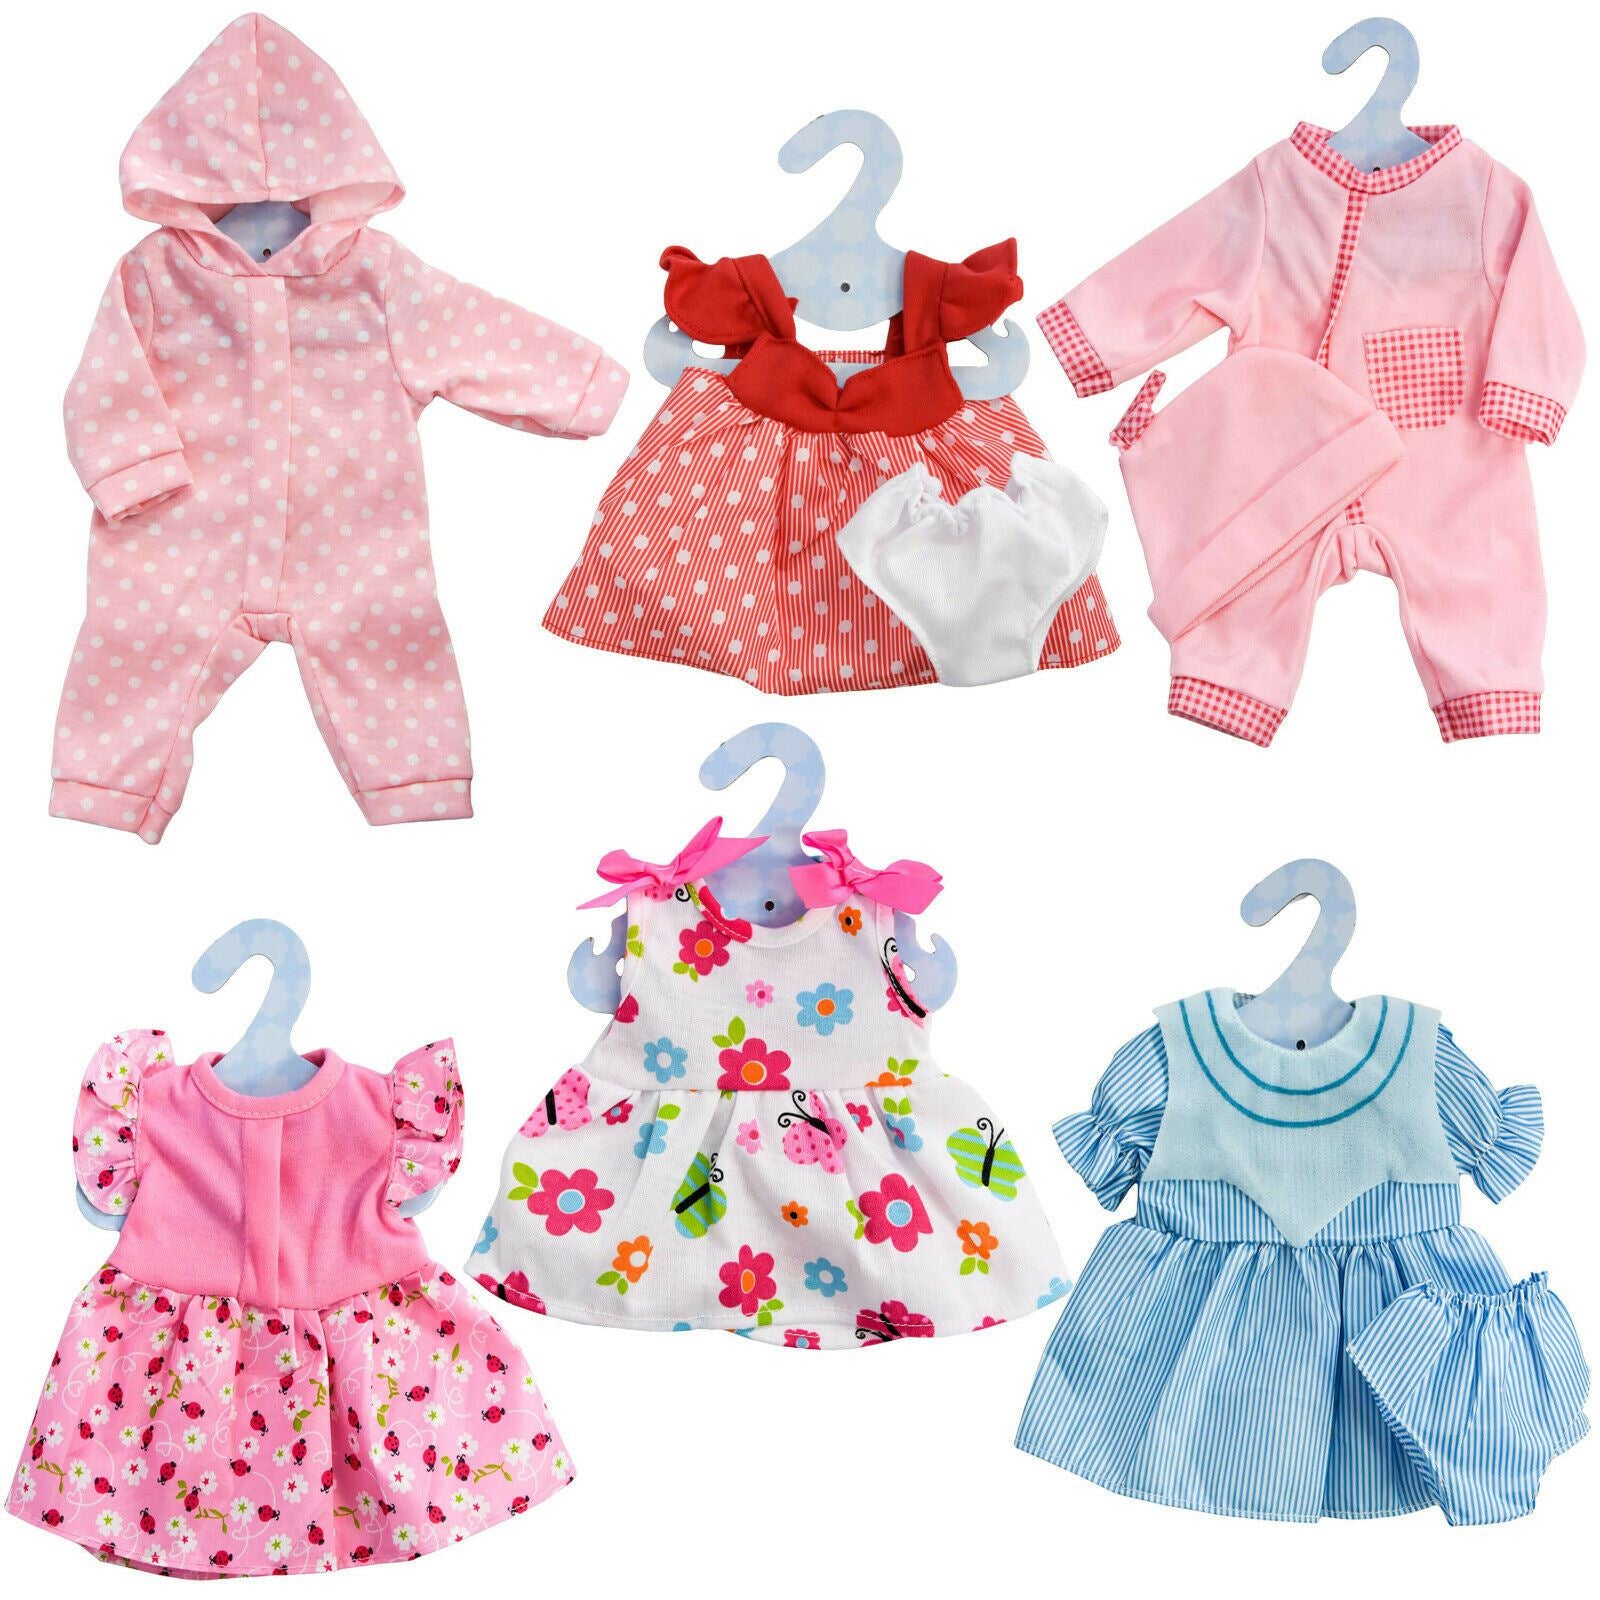 Baby Doll Clothes Set of 6 for Dolls 12-16